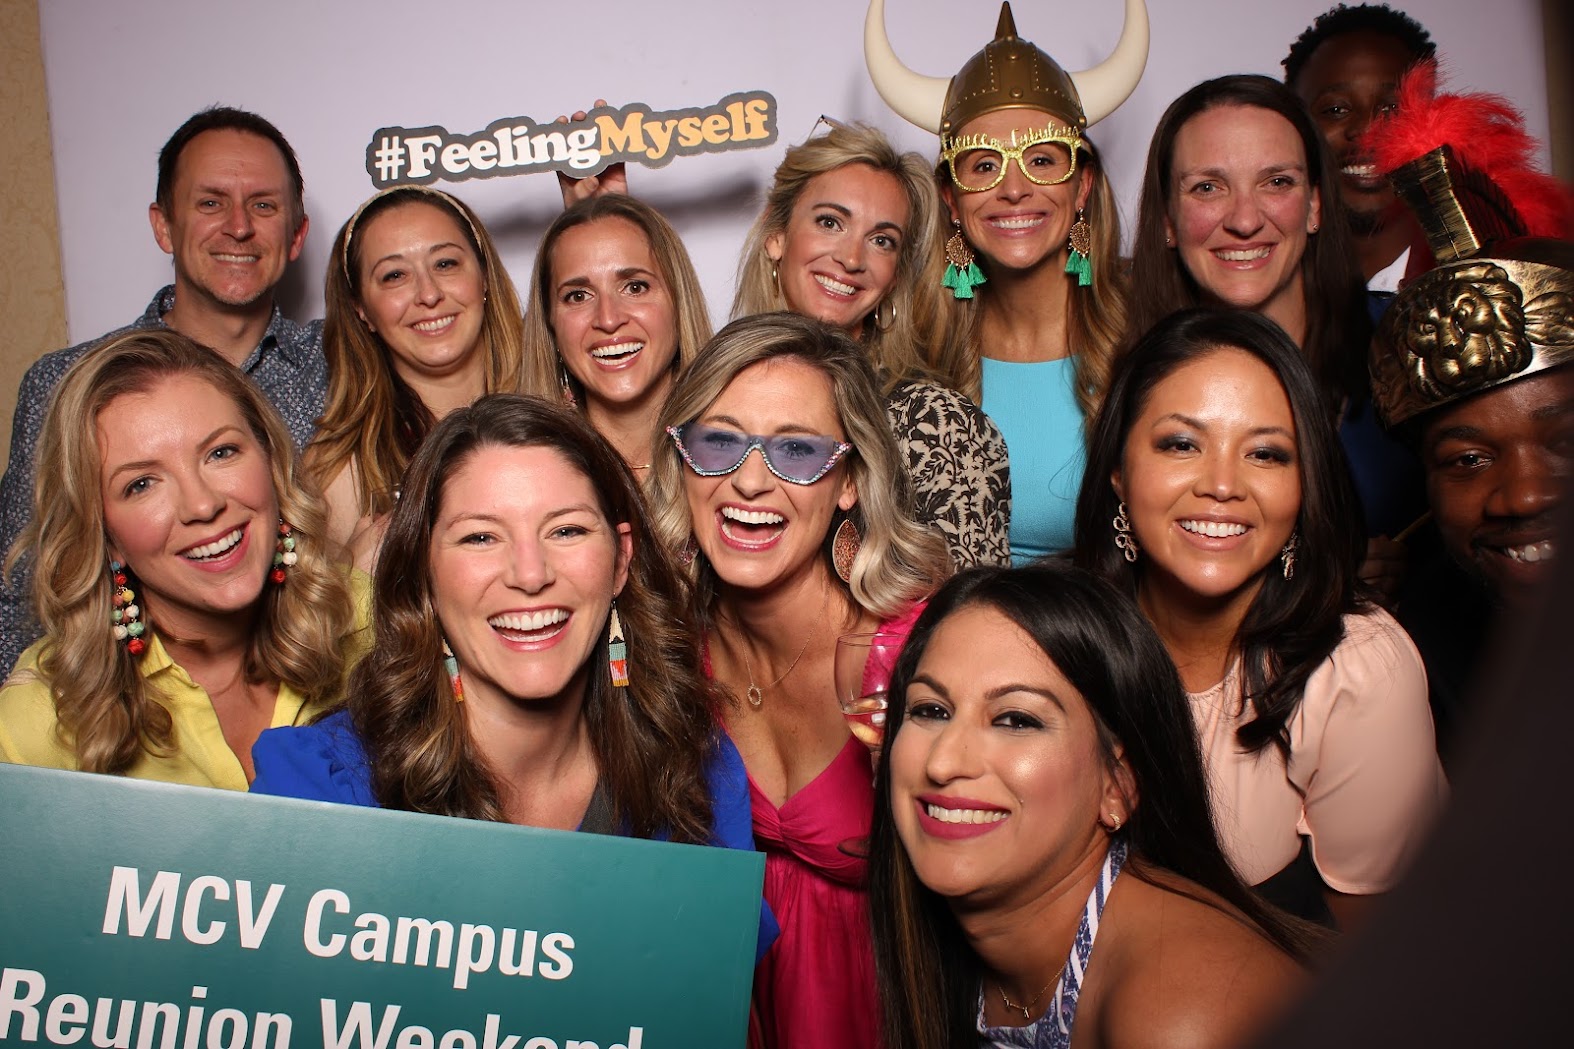 A group of people posing for a fun photo booth photo holding a sign that reads MCV Campus Reunion Weekend